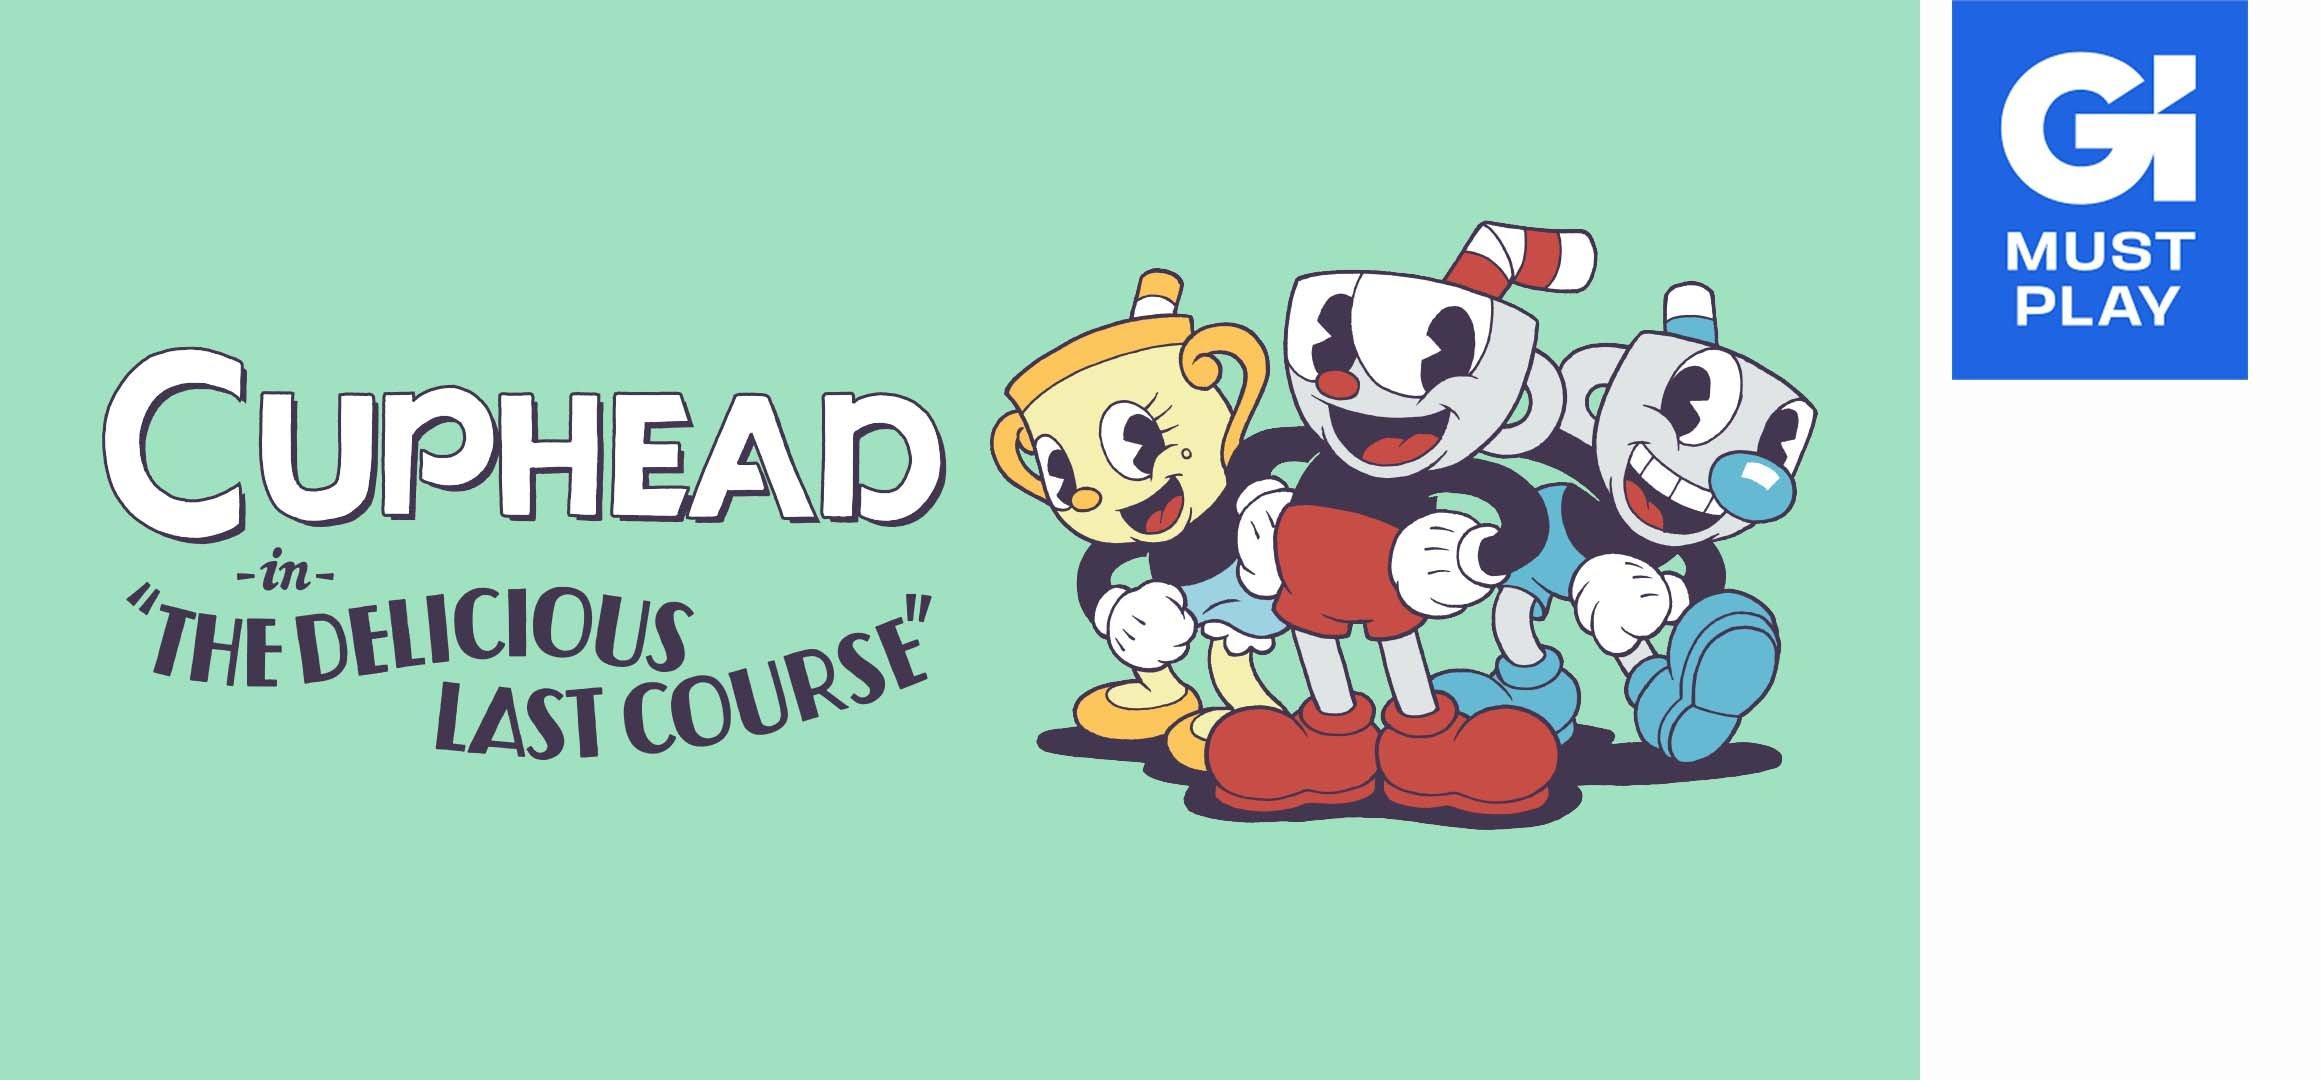 Cuphead - The Delicious Last Course - Nintendo Switch, Nintendo Switch